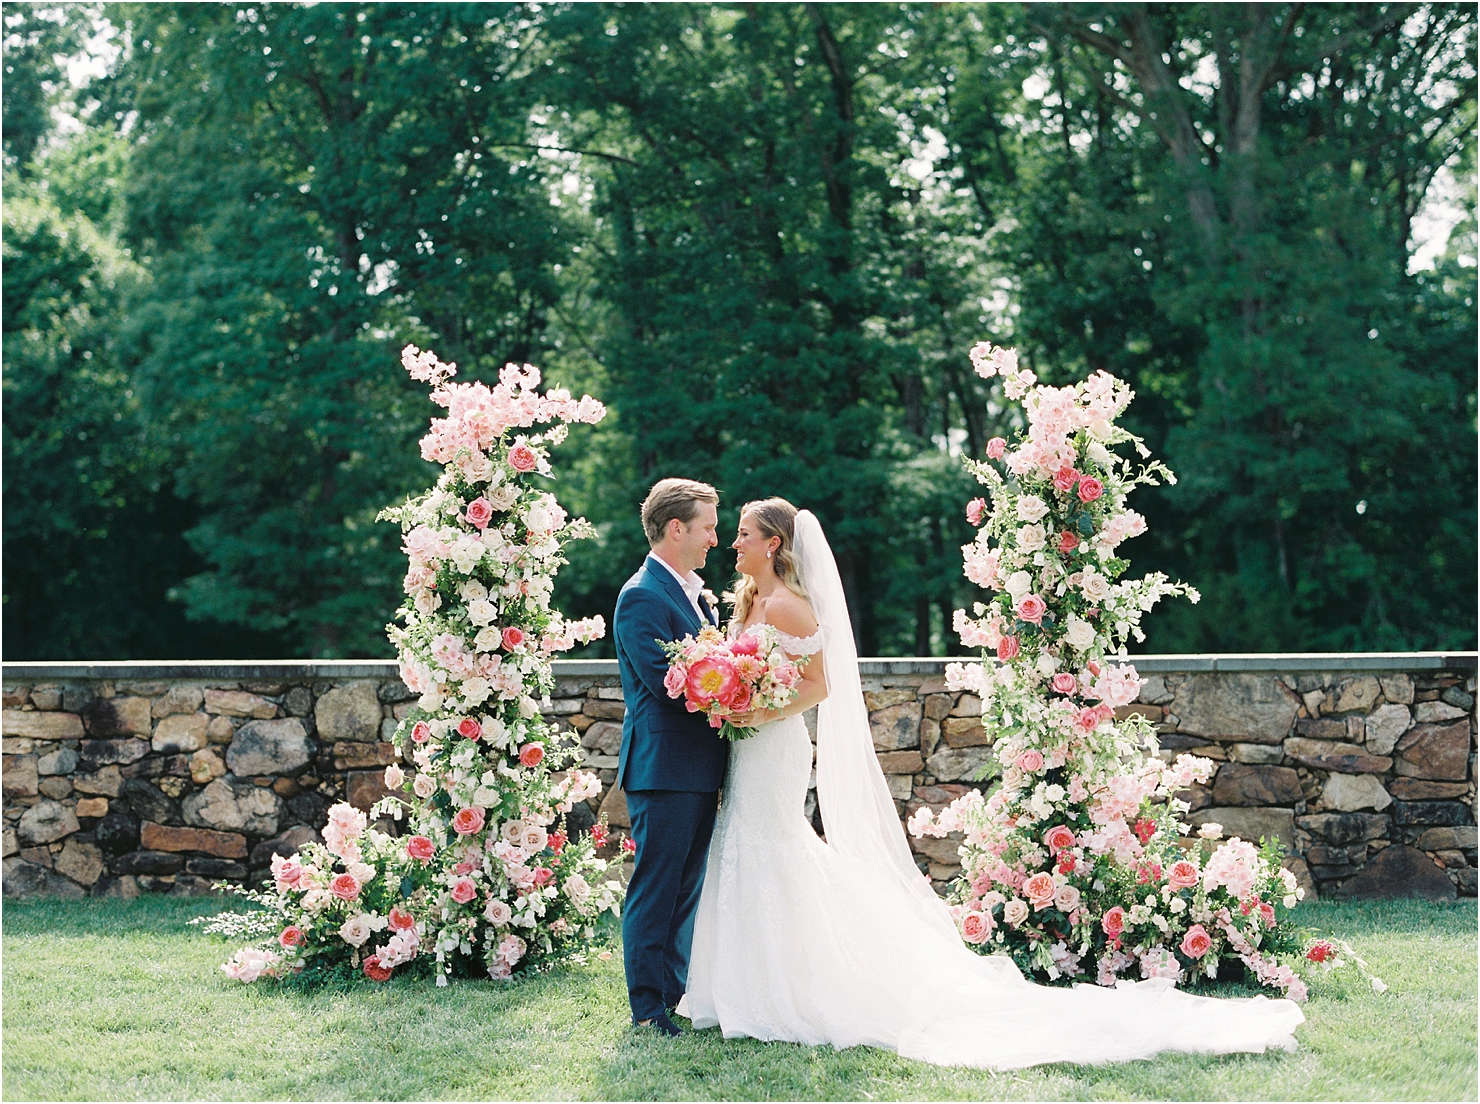 Wedding Ceremony Floral Arches